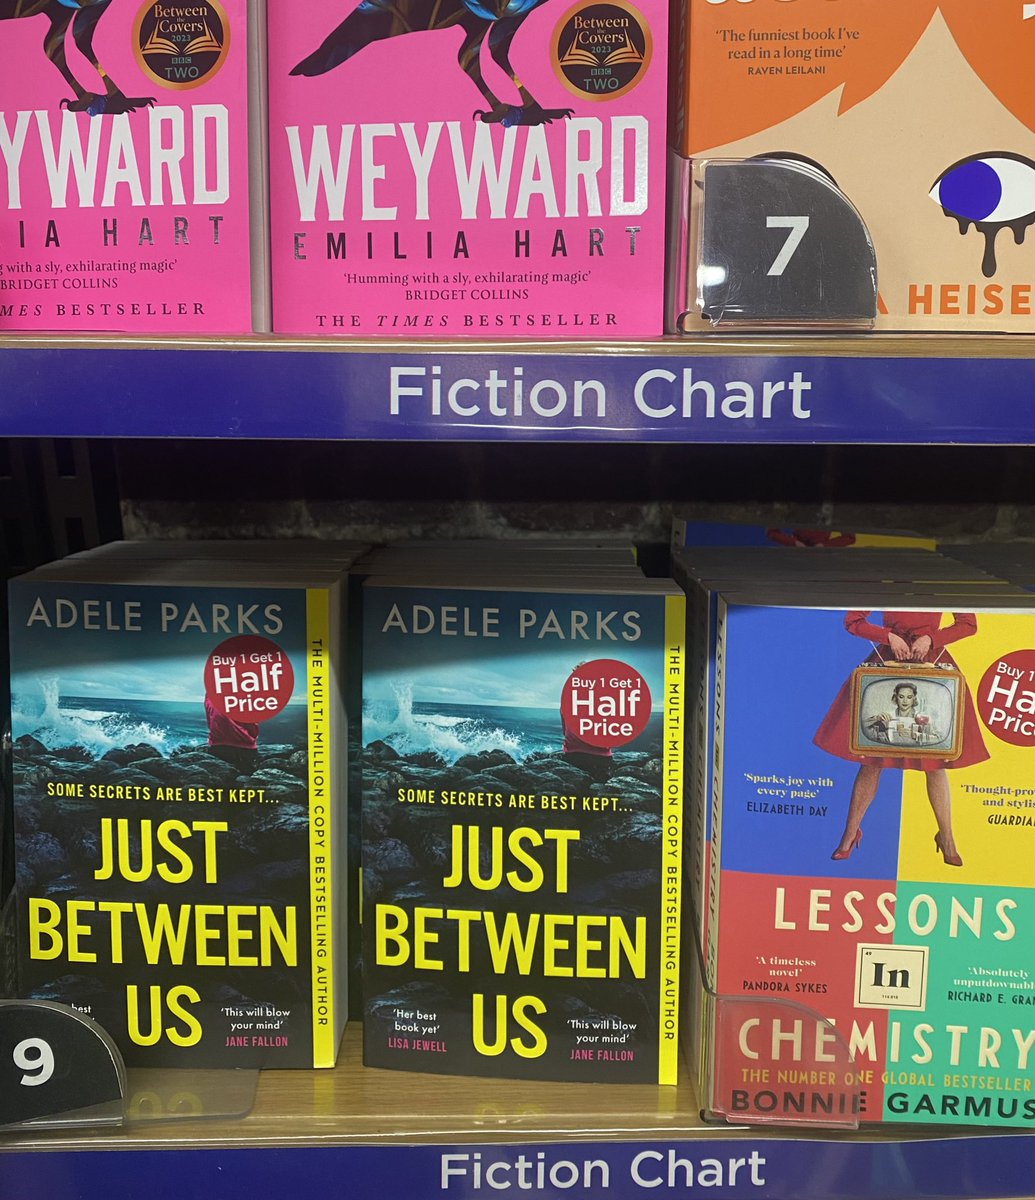 And keeping very good company in @WHSmith Travel at lunchtime… 👀#JustBetweenUs @adeleparks @HQstories